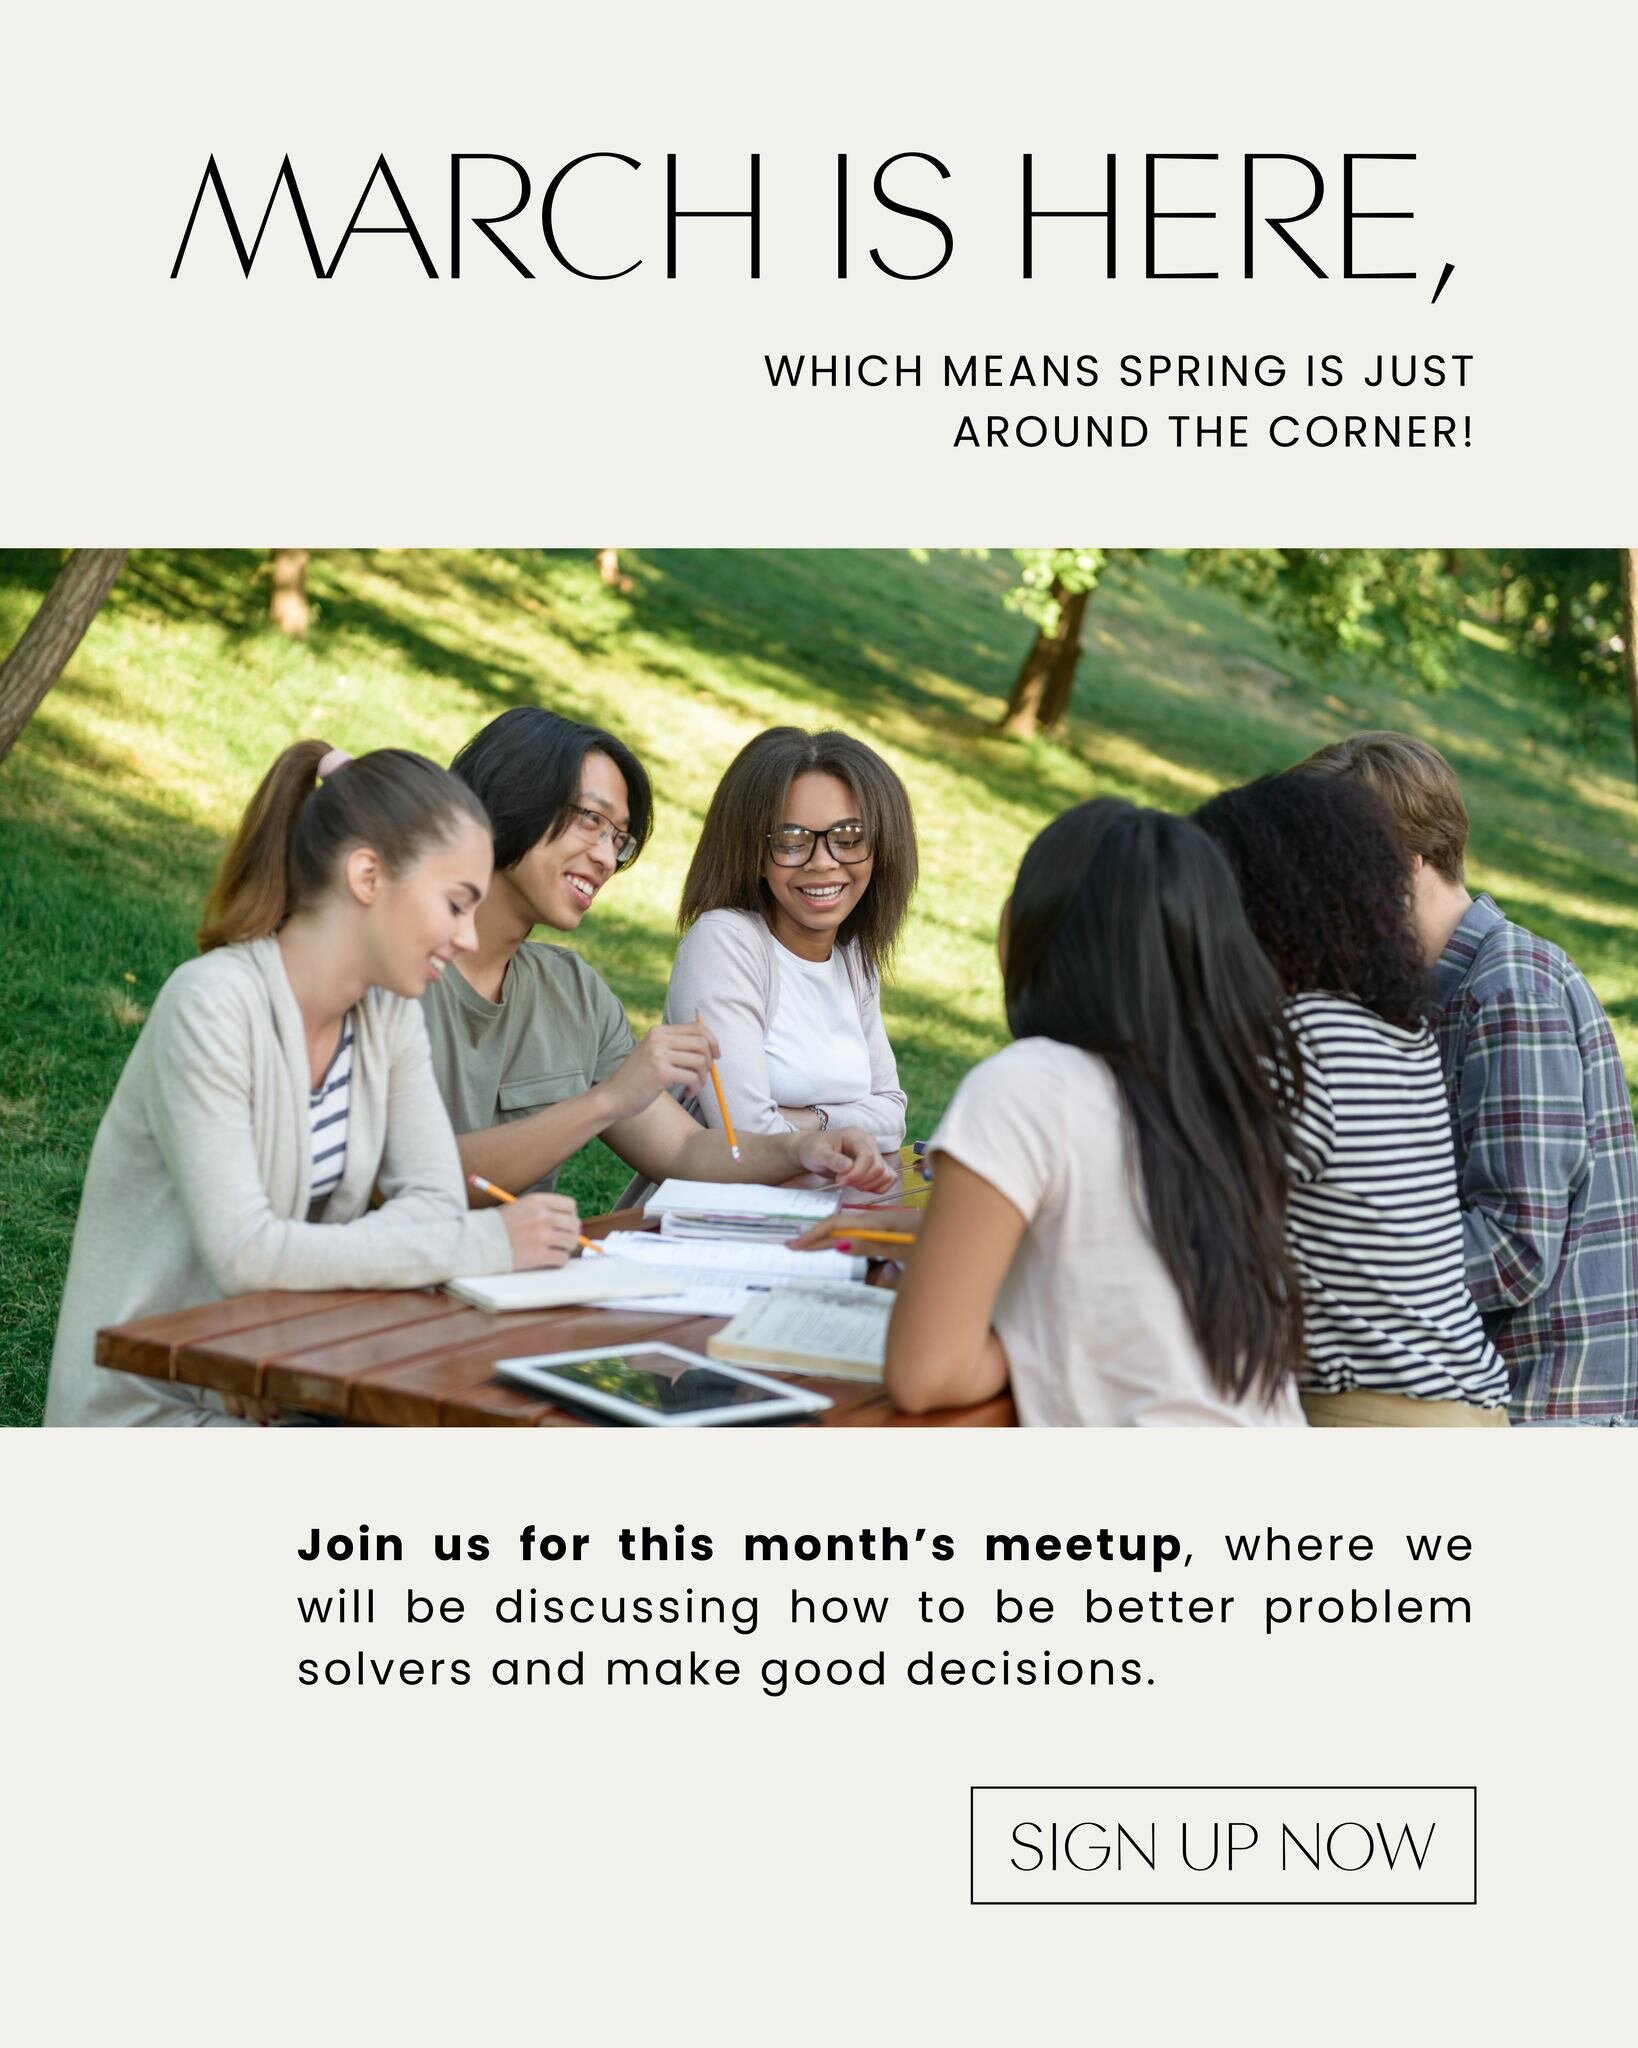 📢 Save the Date for our March Sunday Monthly Meetup! 🌟

Hey everyone! 🎉 Get ready for an exciting March Sunday Monthly Meetup where we'll dive into the world of problem-solving and making good decisions! Join us on March 31st for an enriching sess